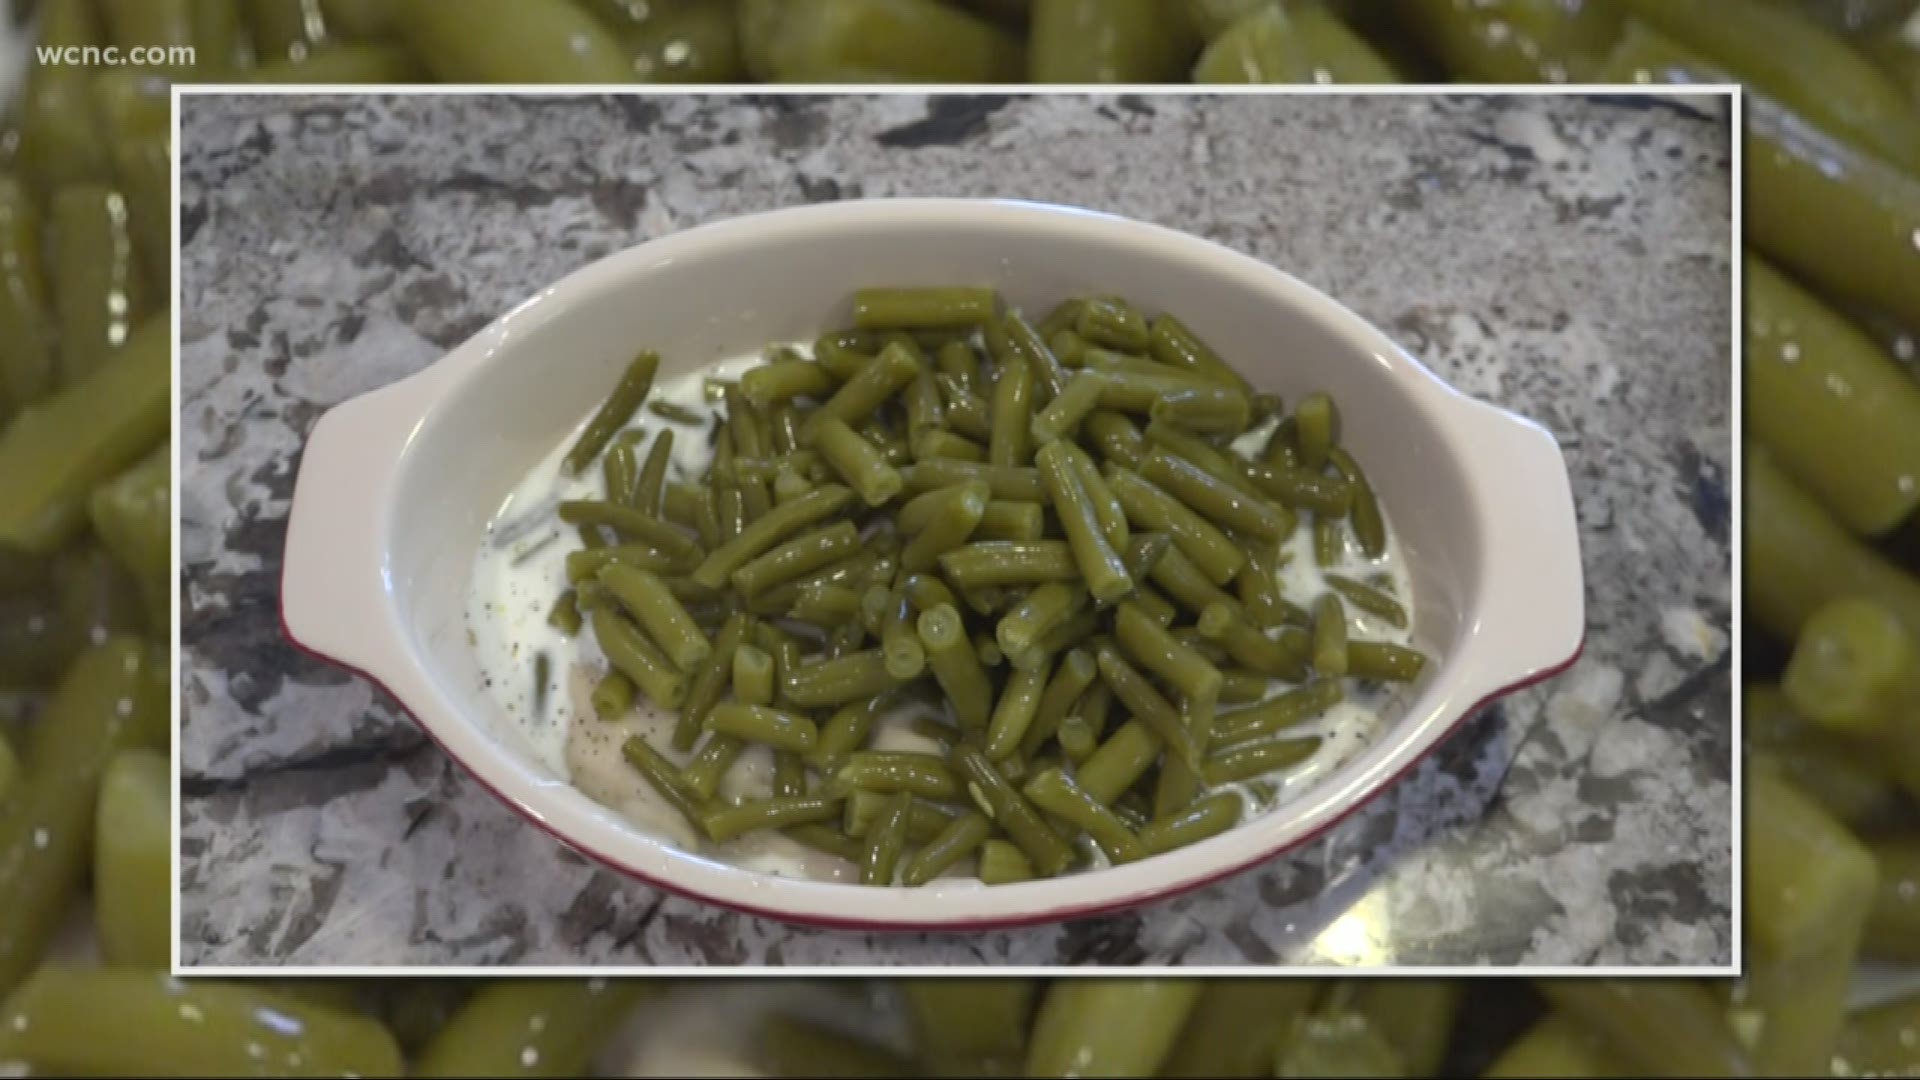 You might see a lot of green bean casserole left over after Thanksgiving. According to a new poll, one-quarter of us say it's our least favorite side dish.